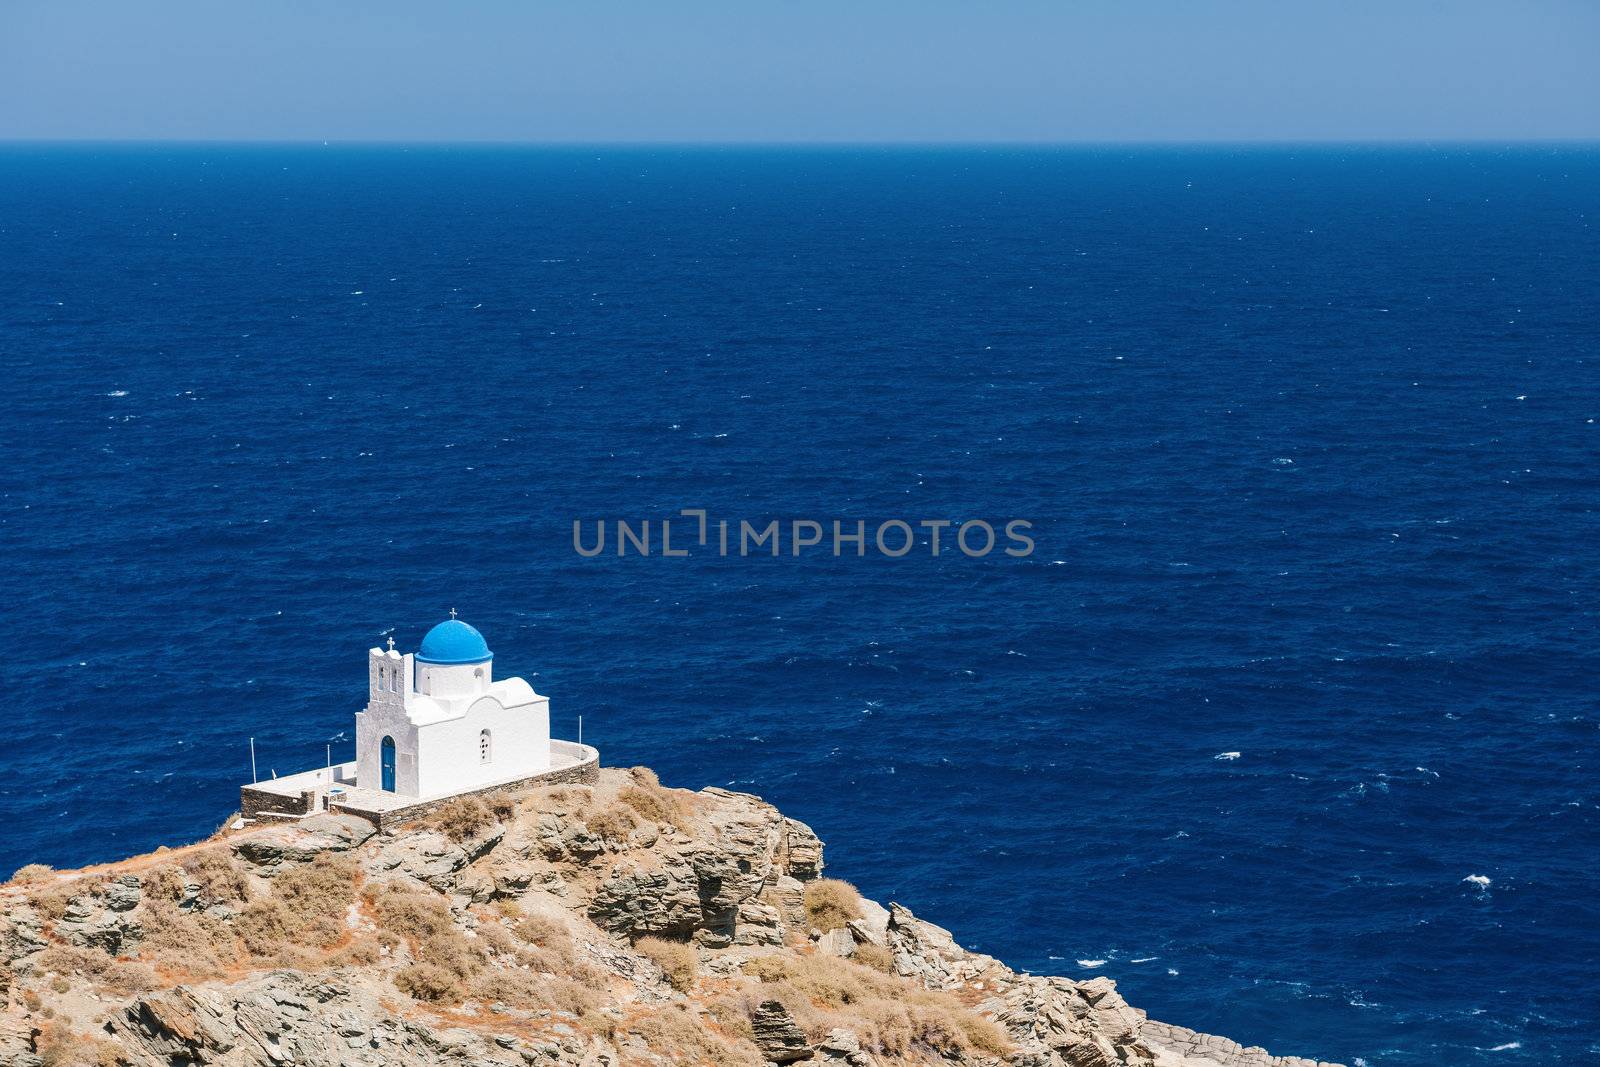 The chapel of 7 Martyrs, on the island of Sifnos, Greece, overlooking the Aegean Sea